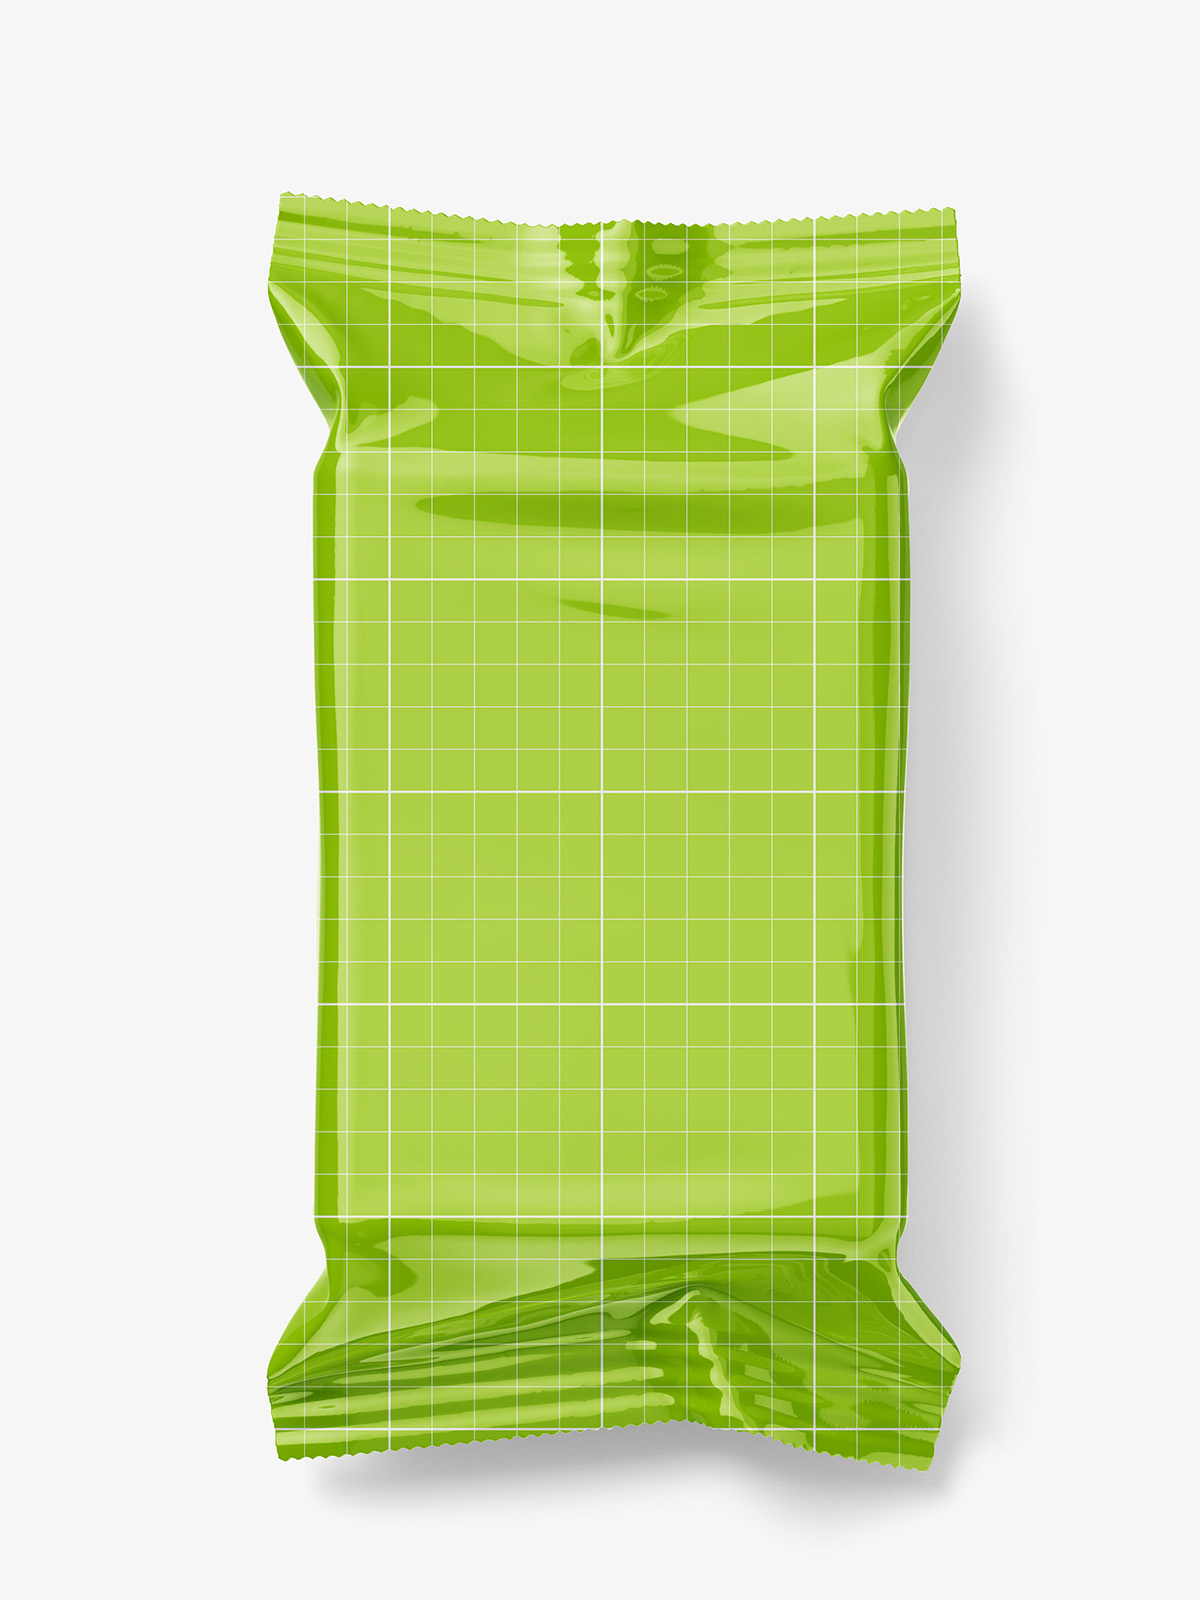 Download Wet wipes bag / glossy - Smarty Mockups